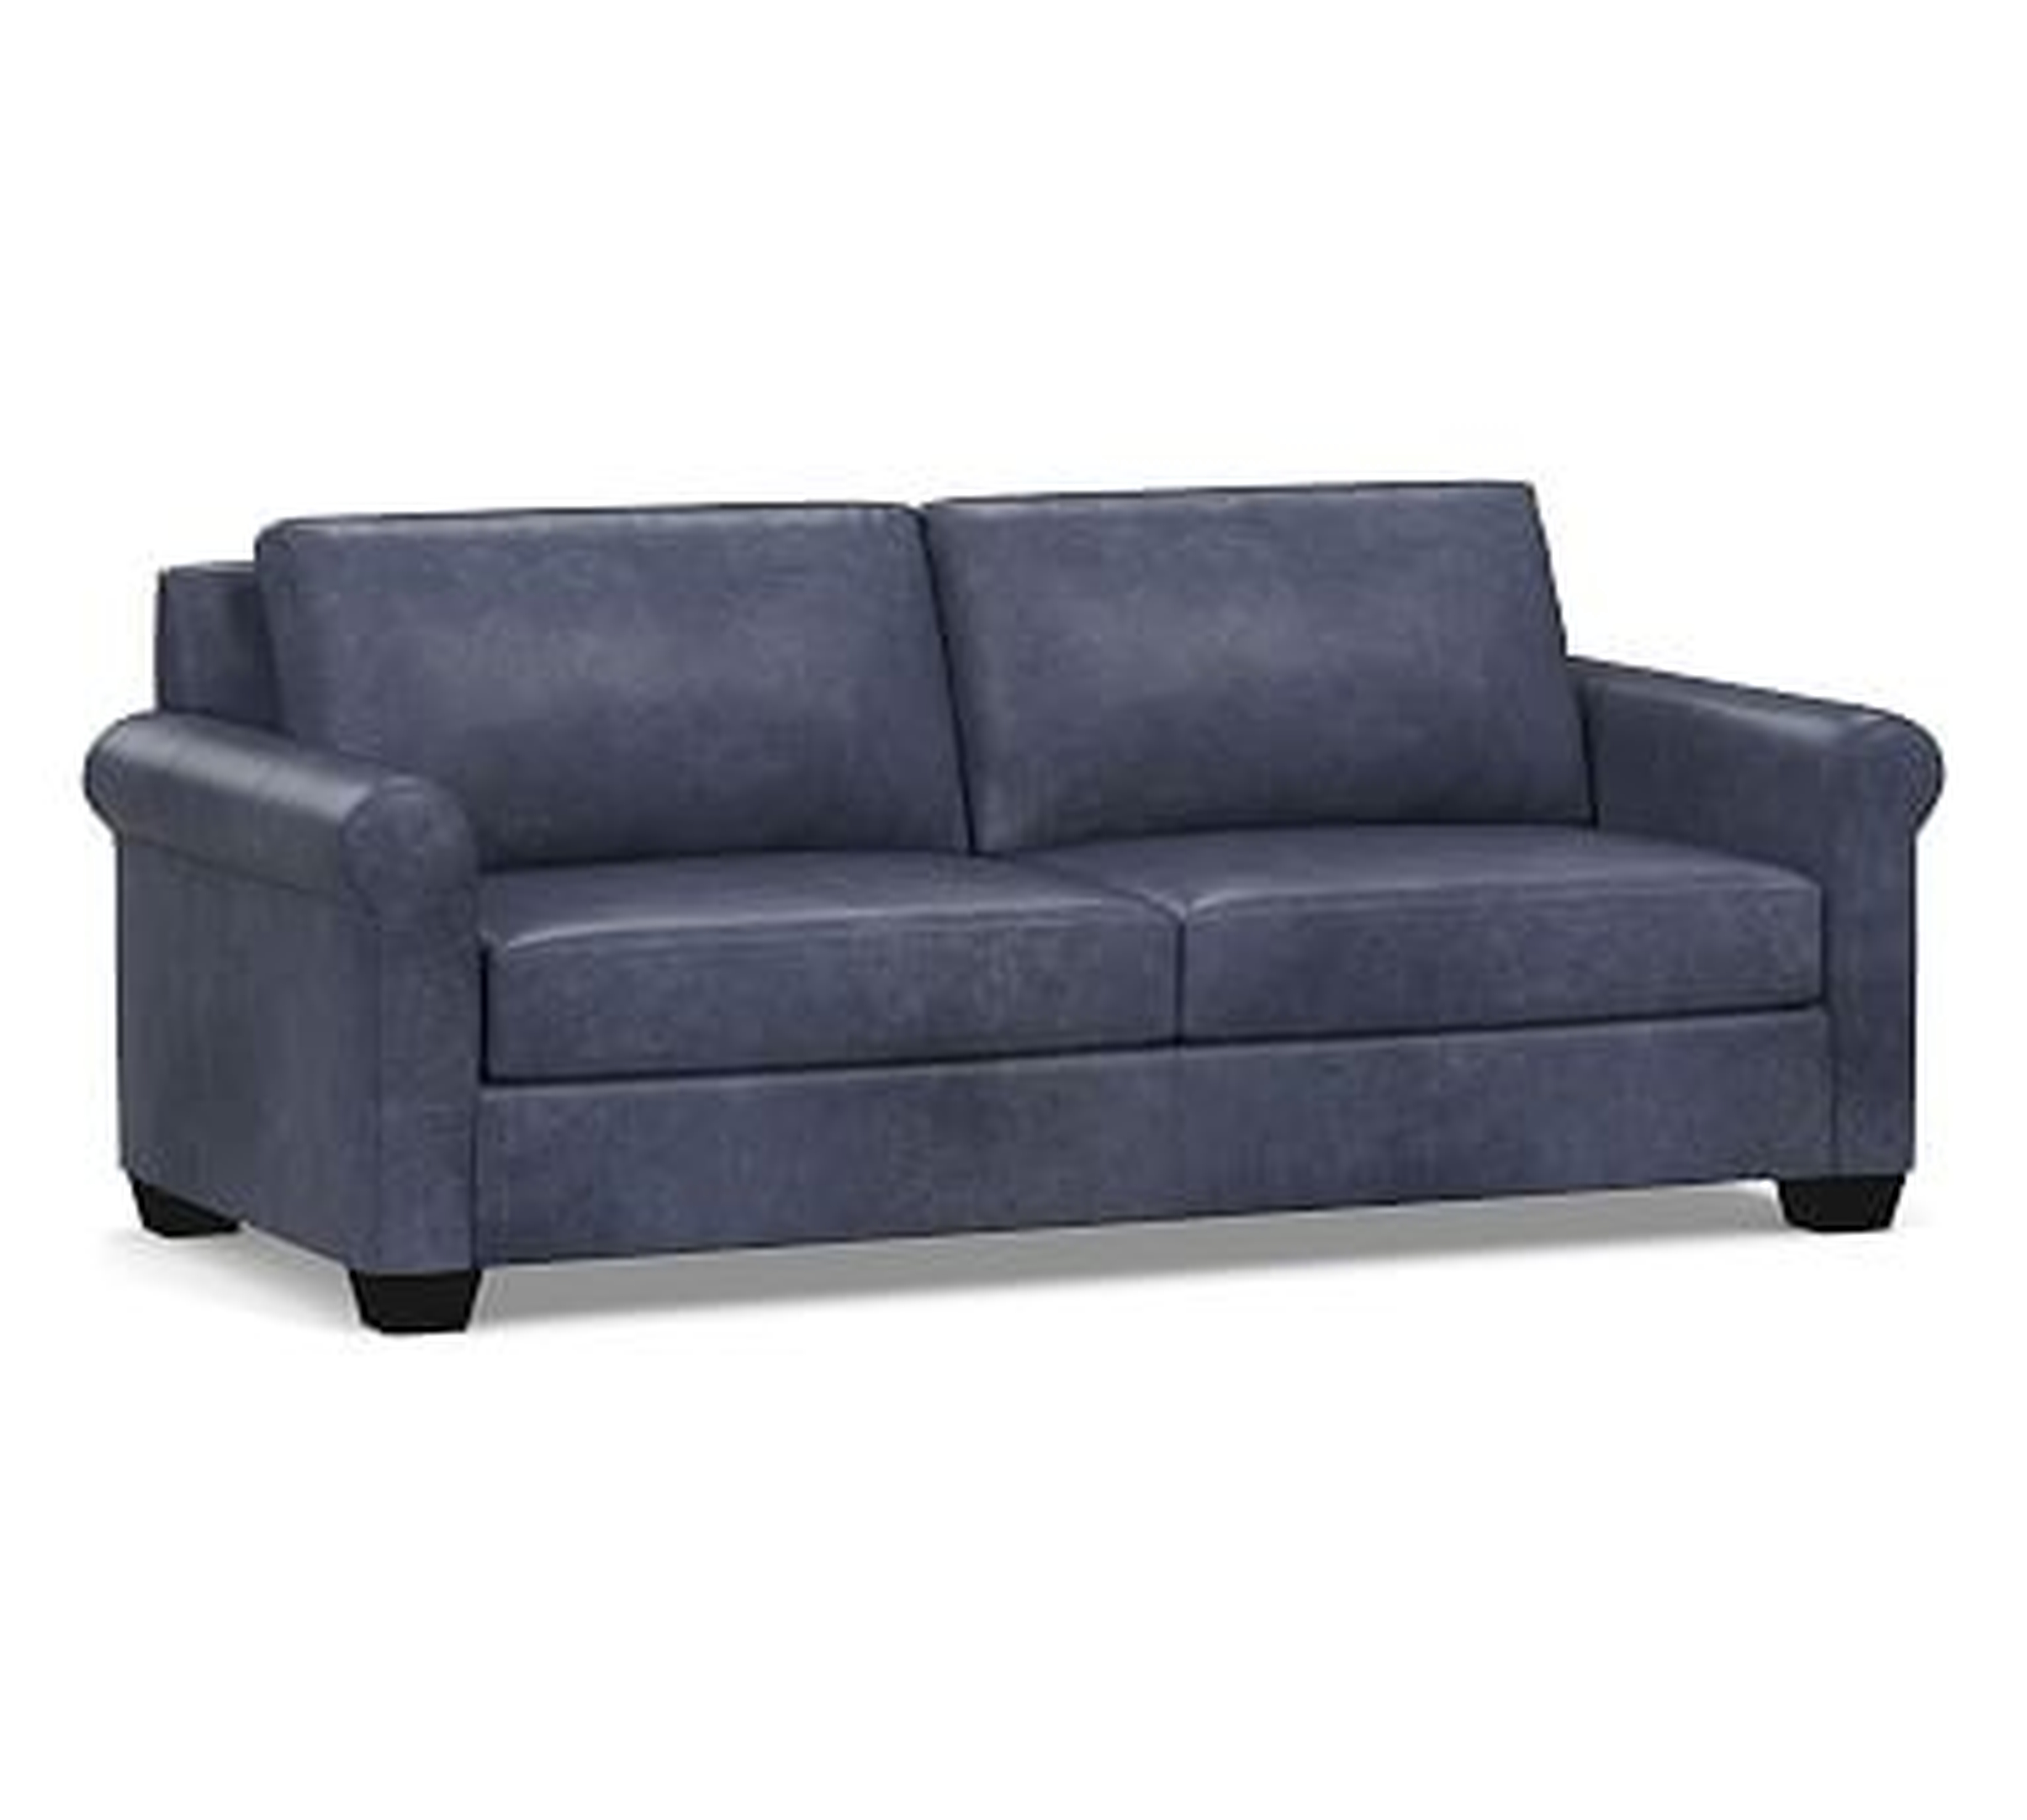 York Roll Arm Leather Sofa 83", Polyester Wrapped Cushions, Statesville Indigo - Pottery Barn